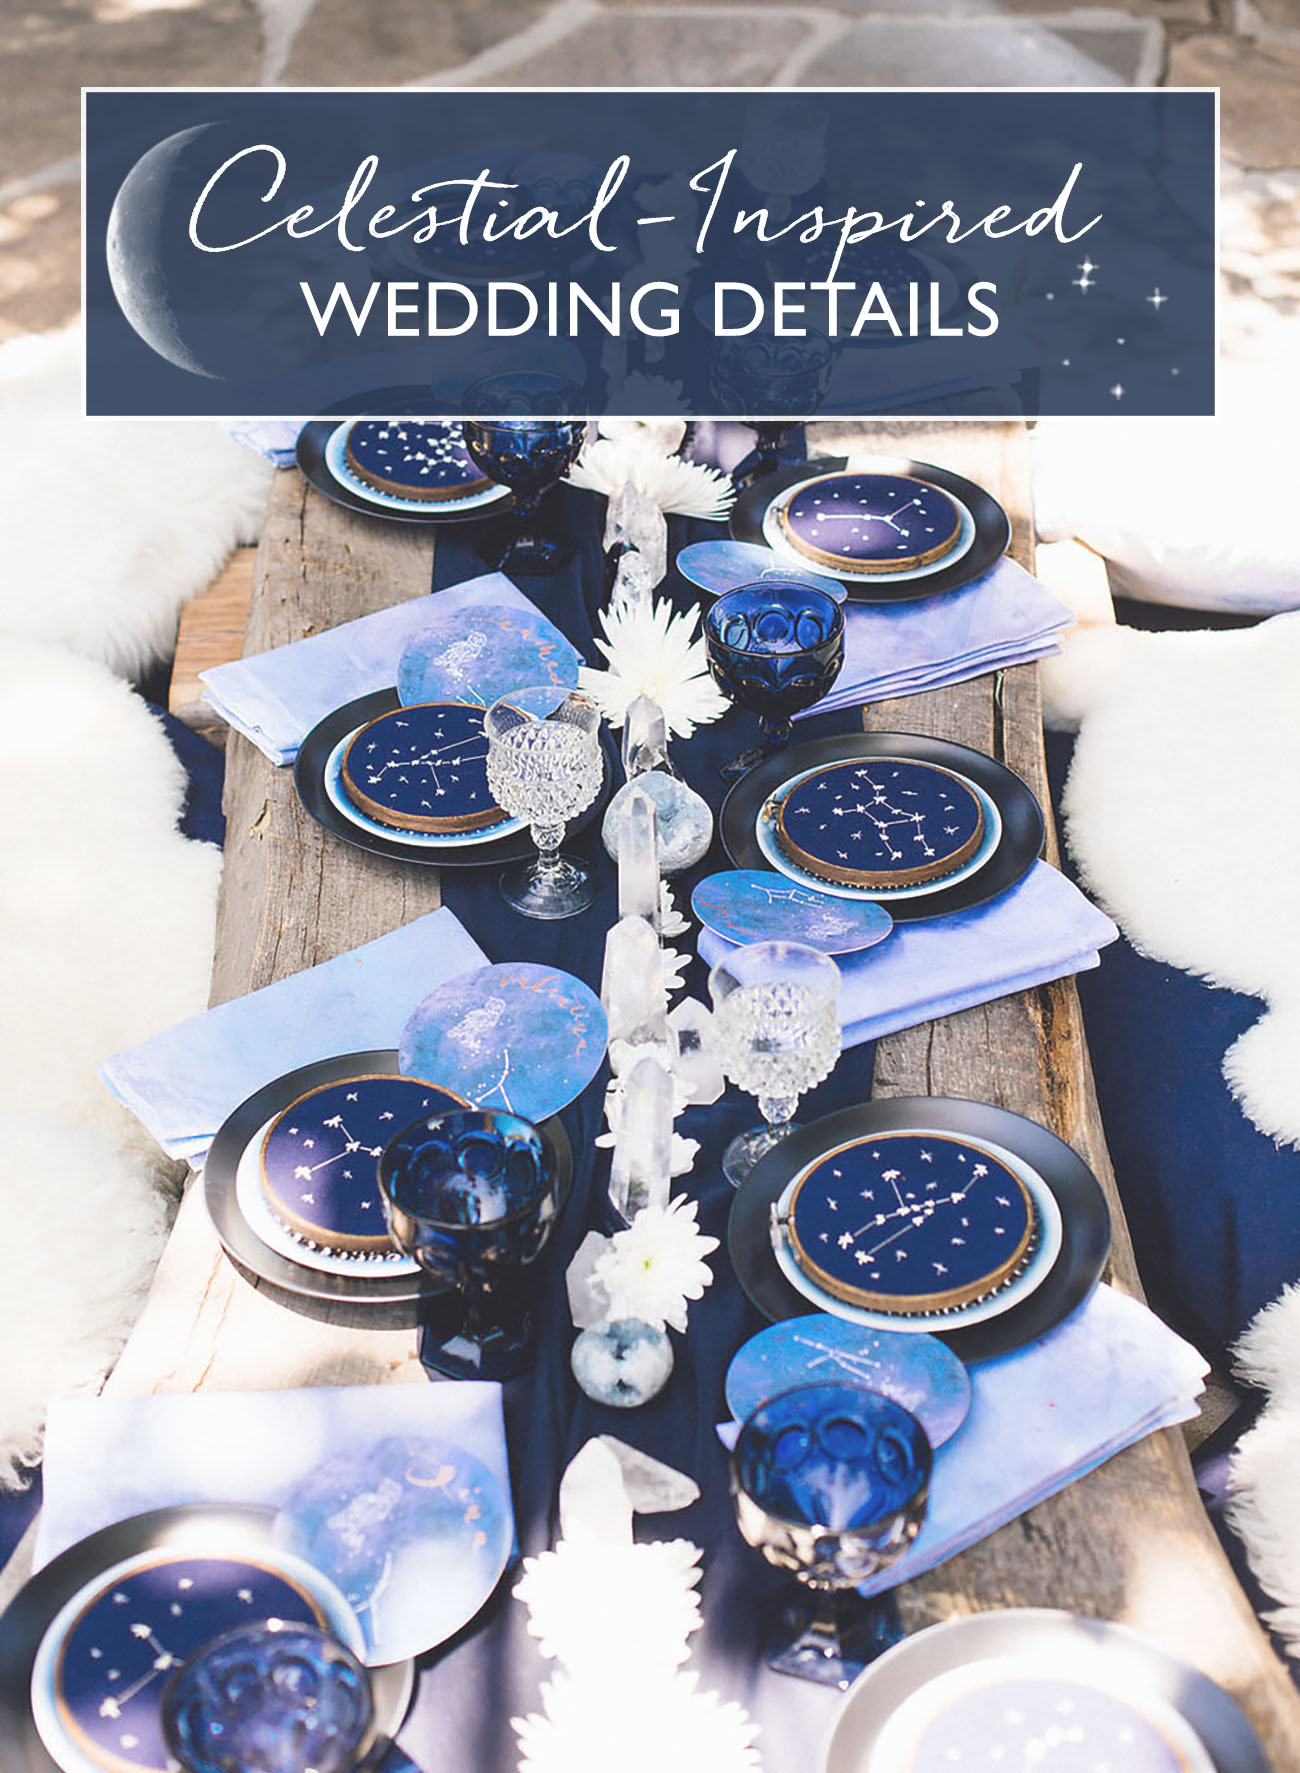 We’re Over the Moon for All These Celestial-Inspired Wedding Details